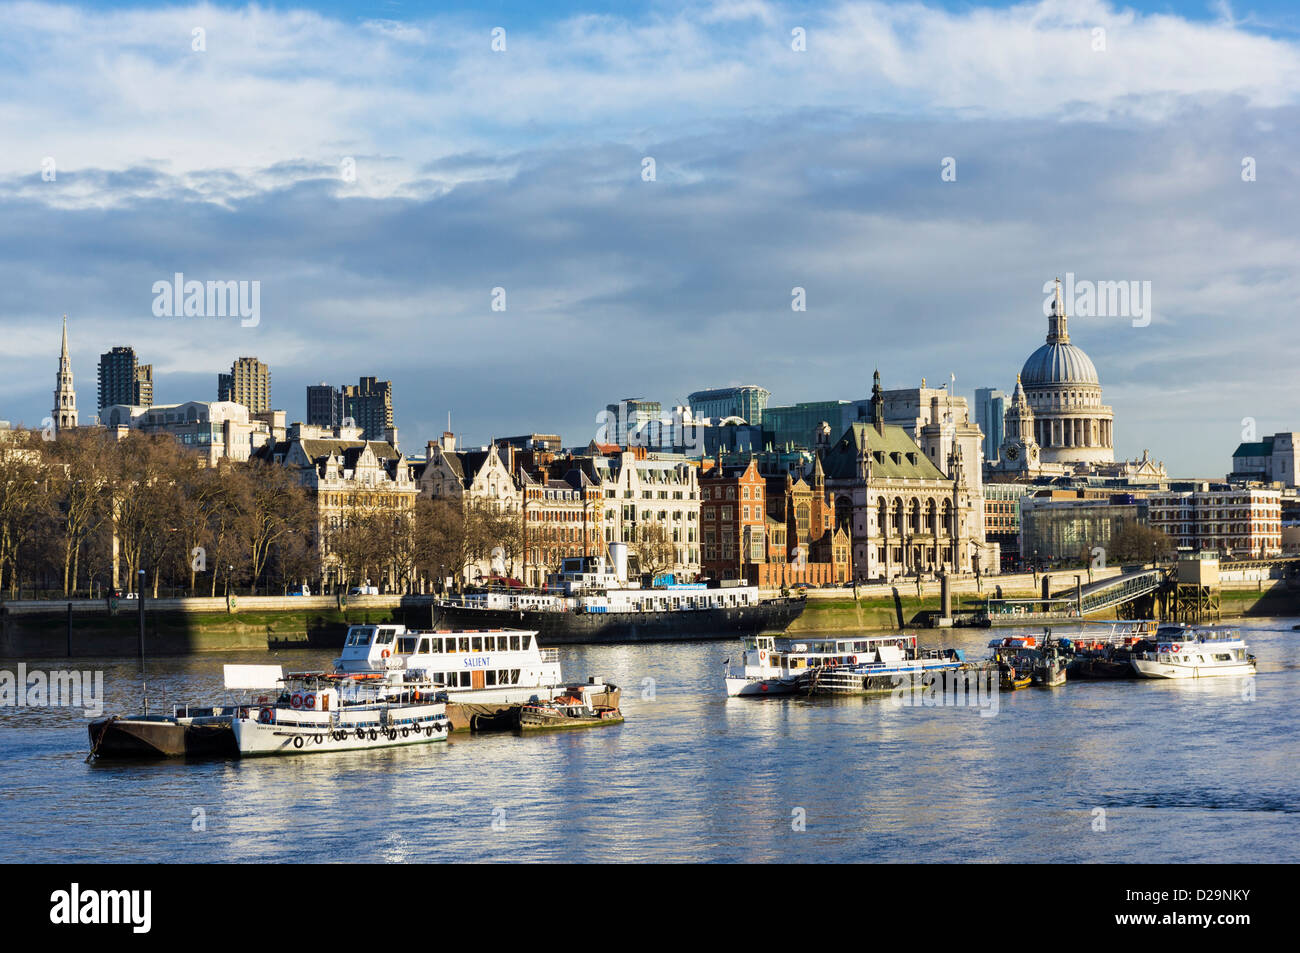 View of River Thames, London, England, UK - from the South Bank with St Paul's Cathedral and boats on the river Stock Photo